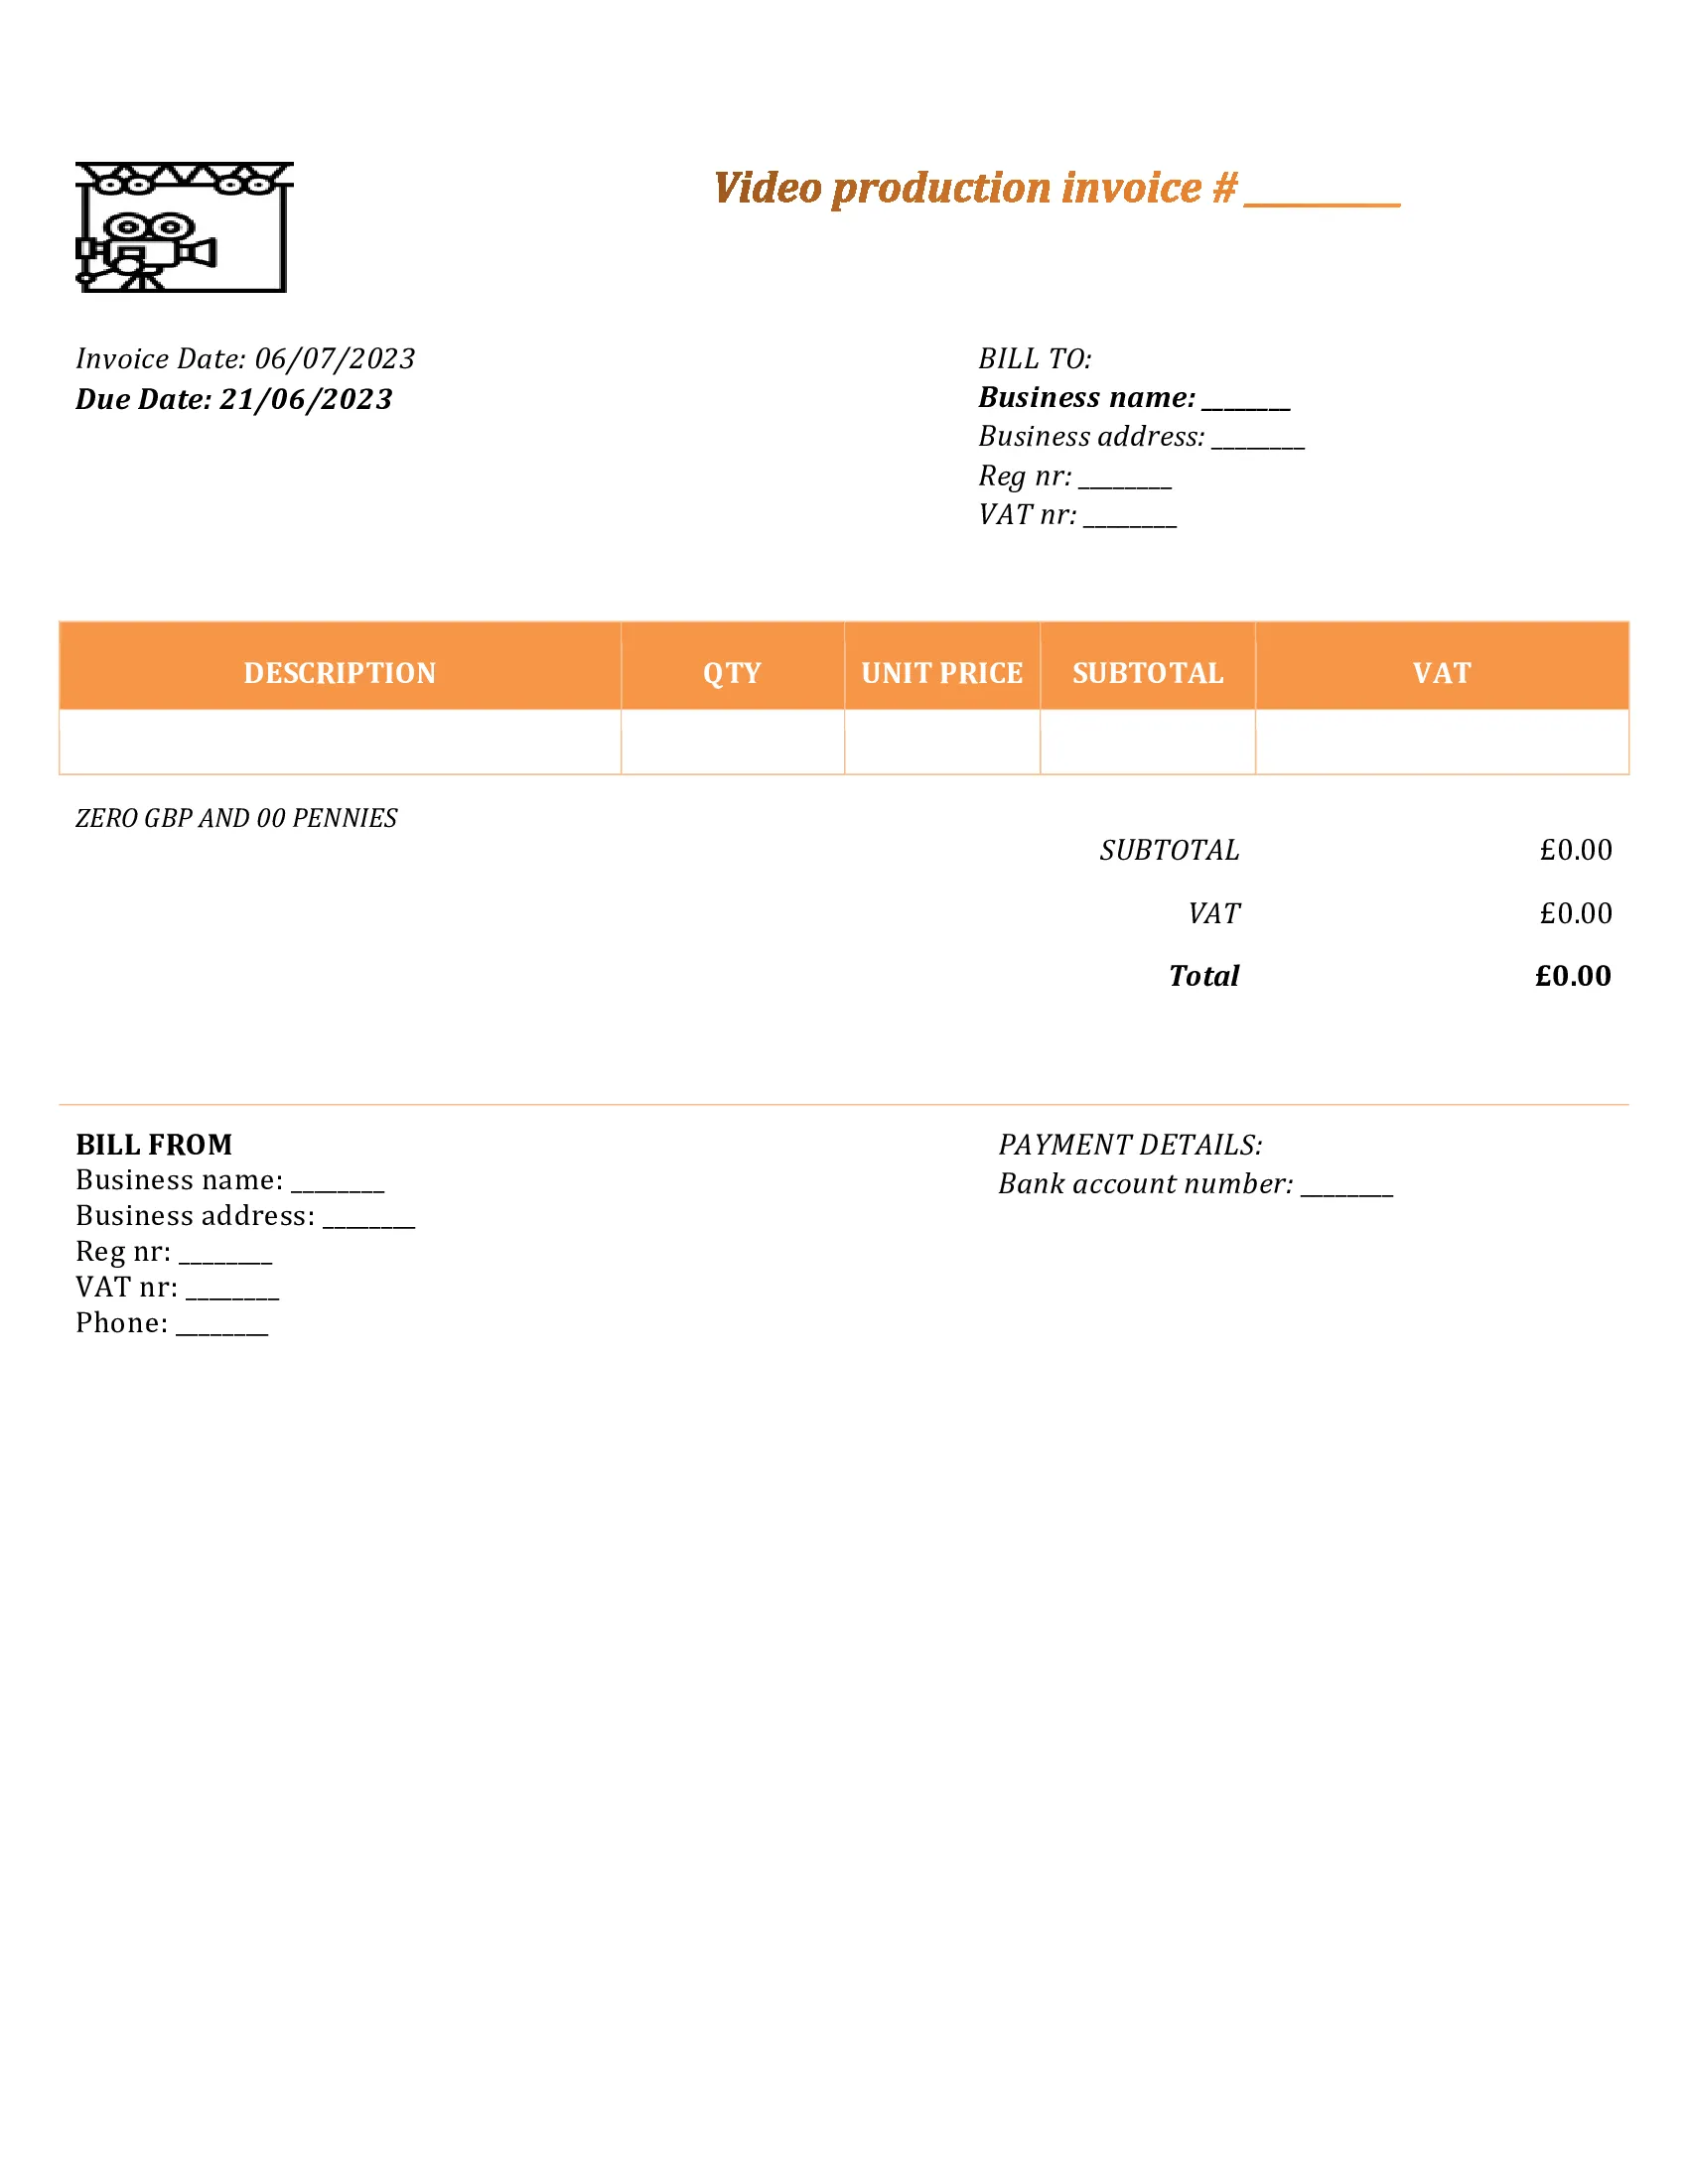 personal video production invoice template UK Word / Google docs